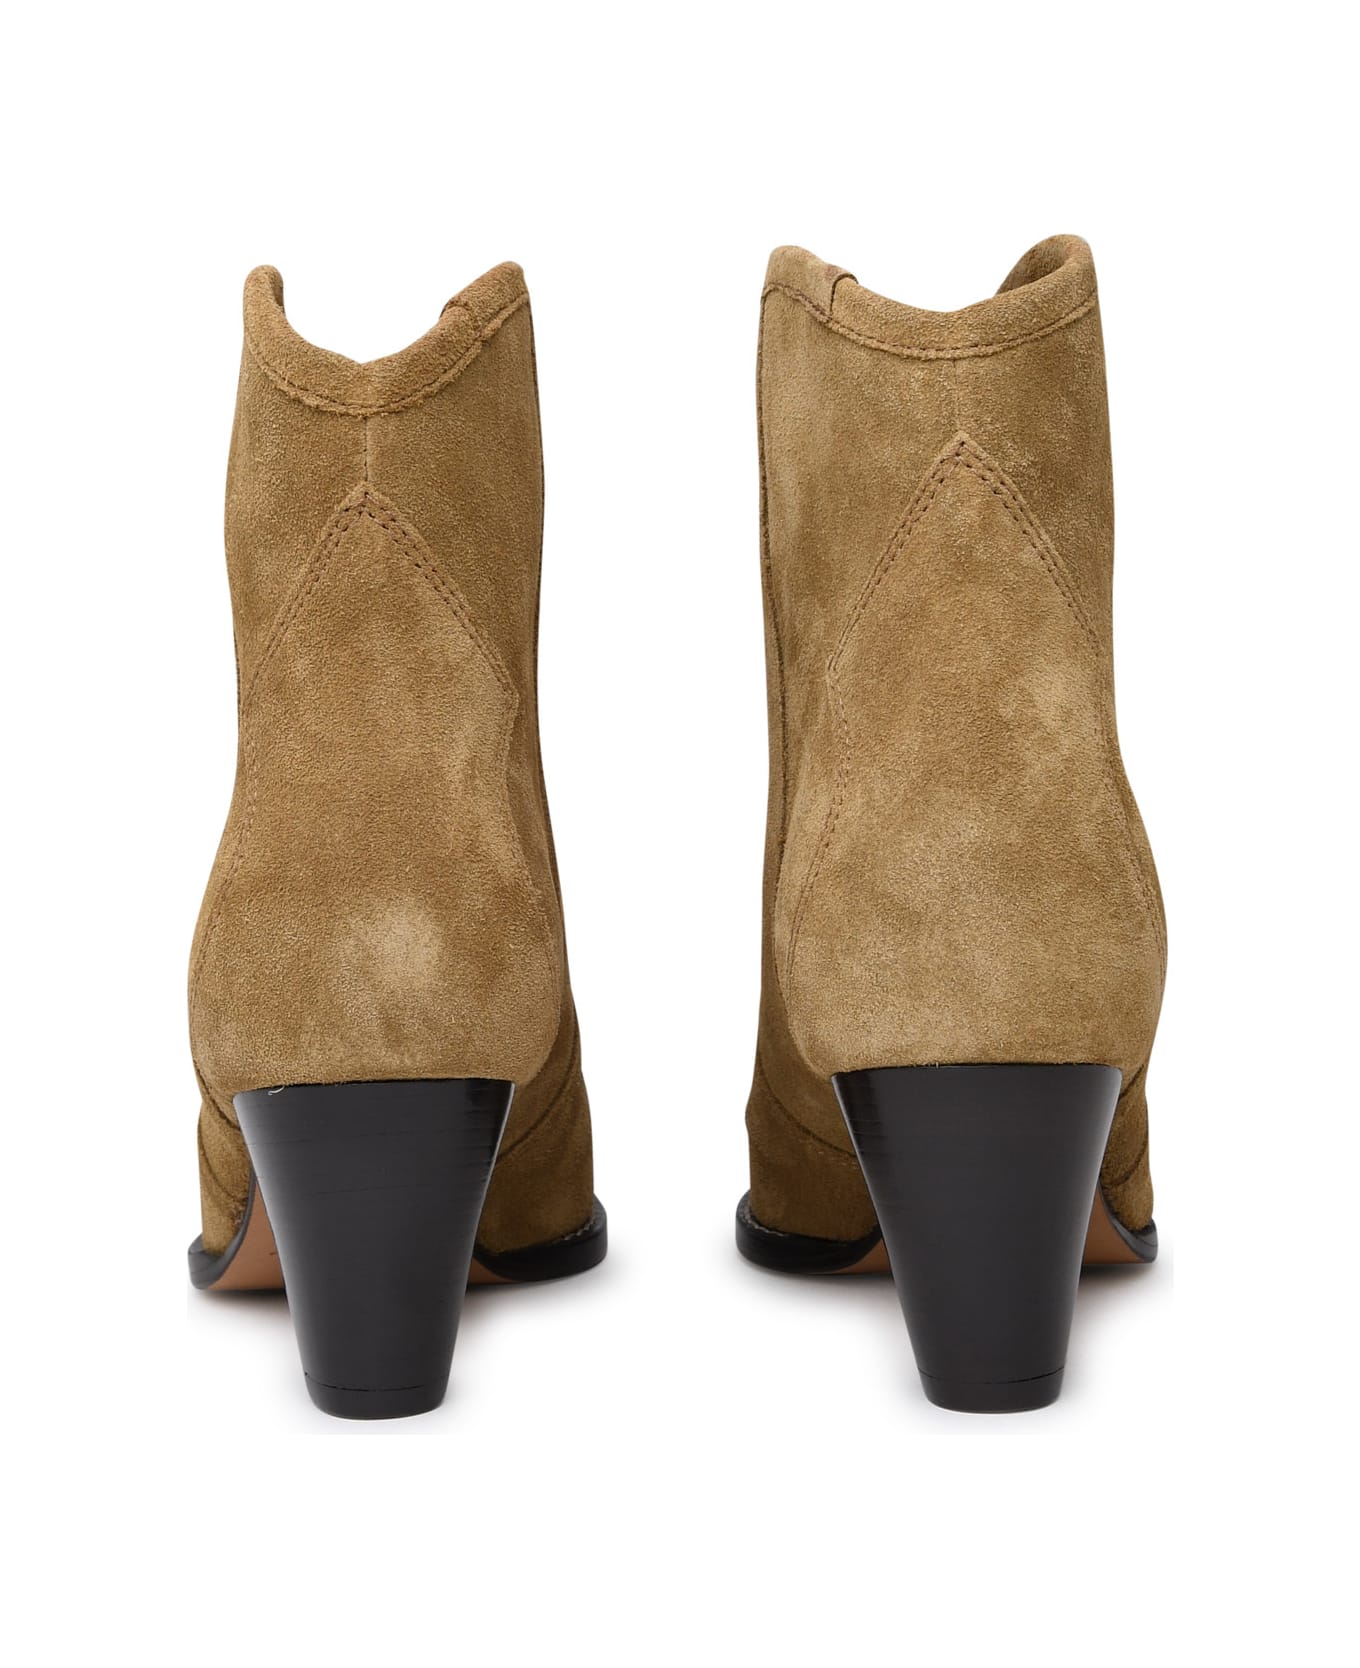 Isabel Marant Darizo Suede Ankle Boots - Brown ブーツ